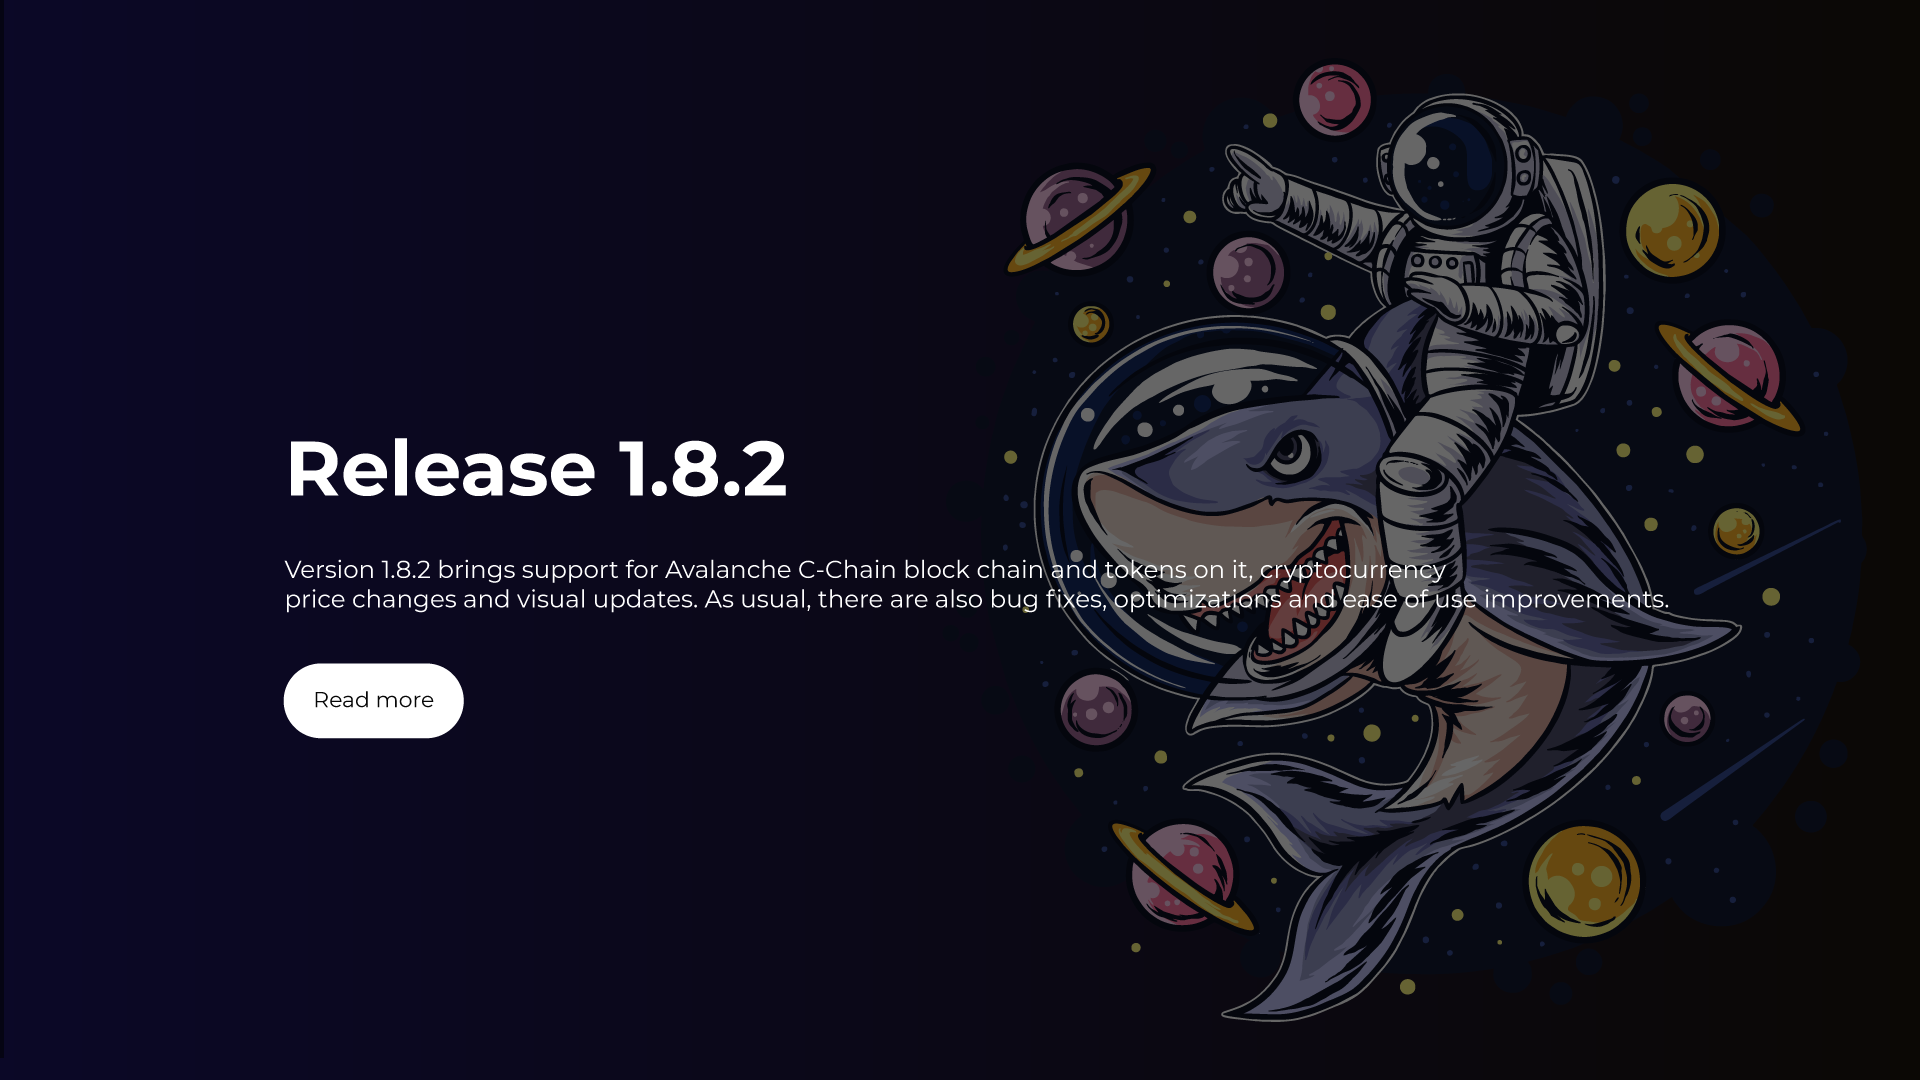 Release 1.8.2